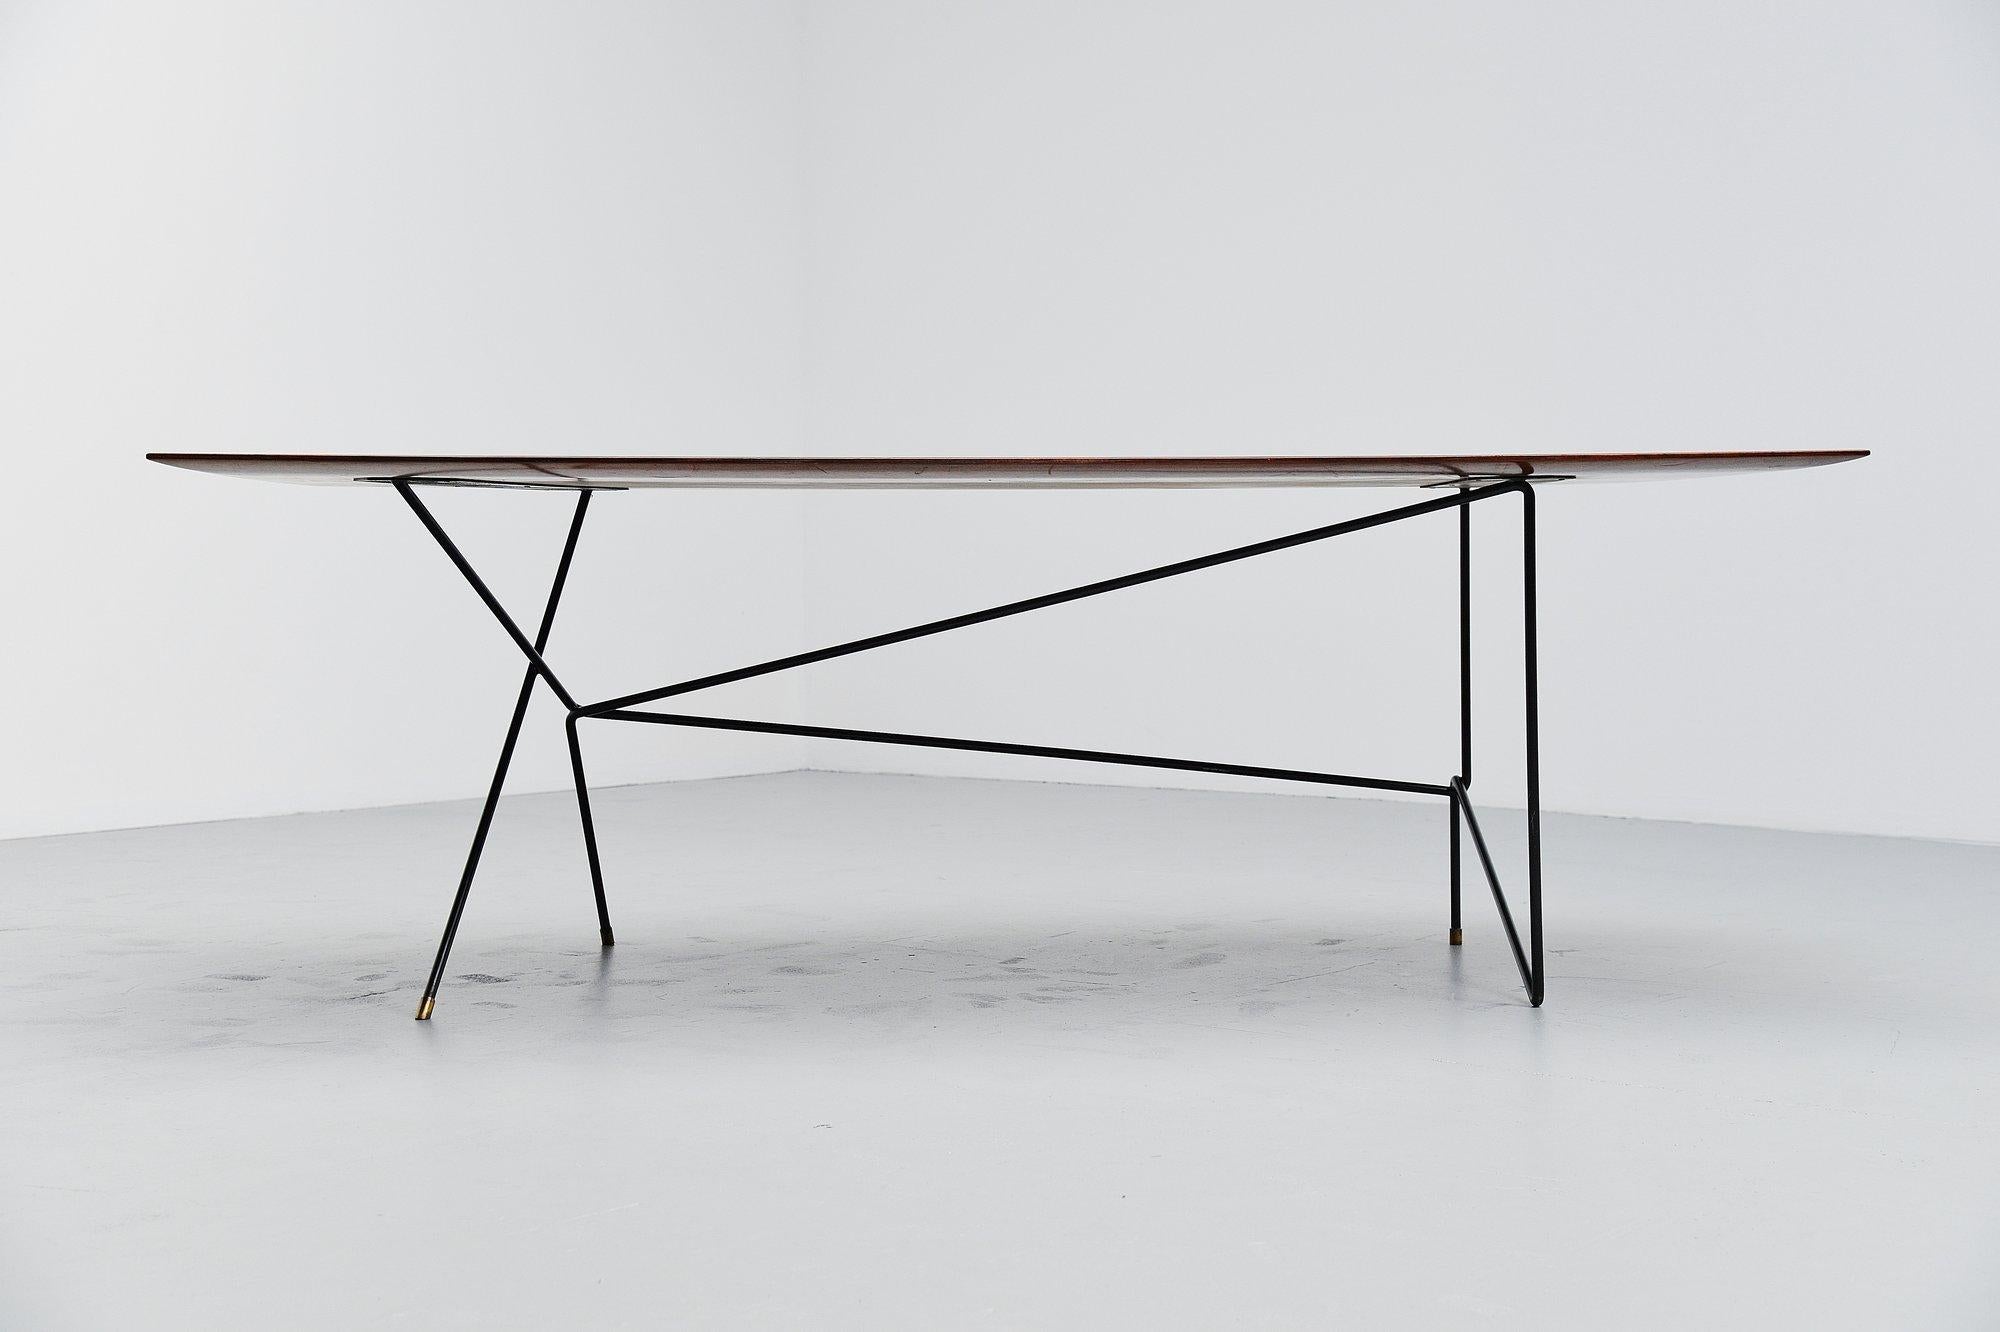 One off writing desk table designed and made by Italian architect Daniele Calabi, Italy 1950. This superb desk table was made by Daniele Calabi for his own use in 1950. This is a one of a kind table with spectacular a-symmetrical wire frame with